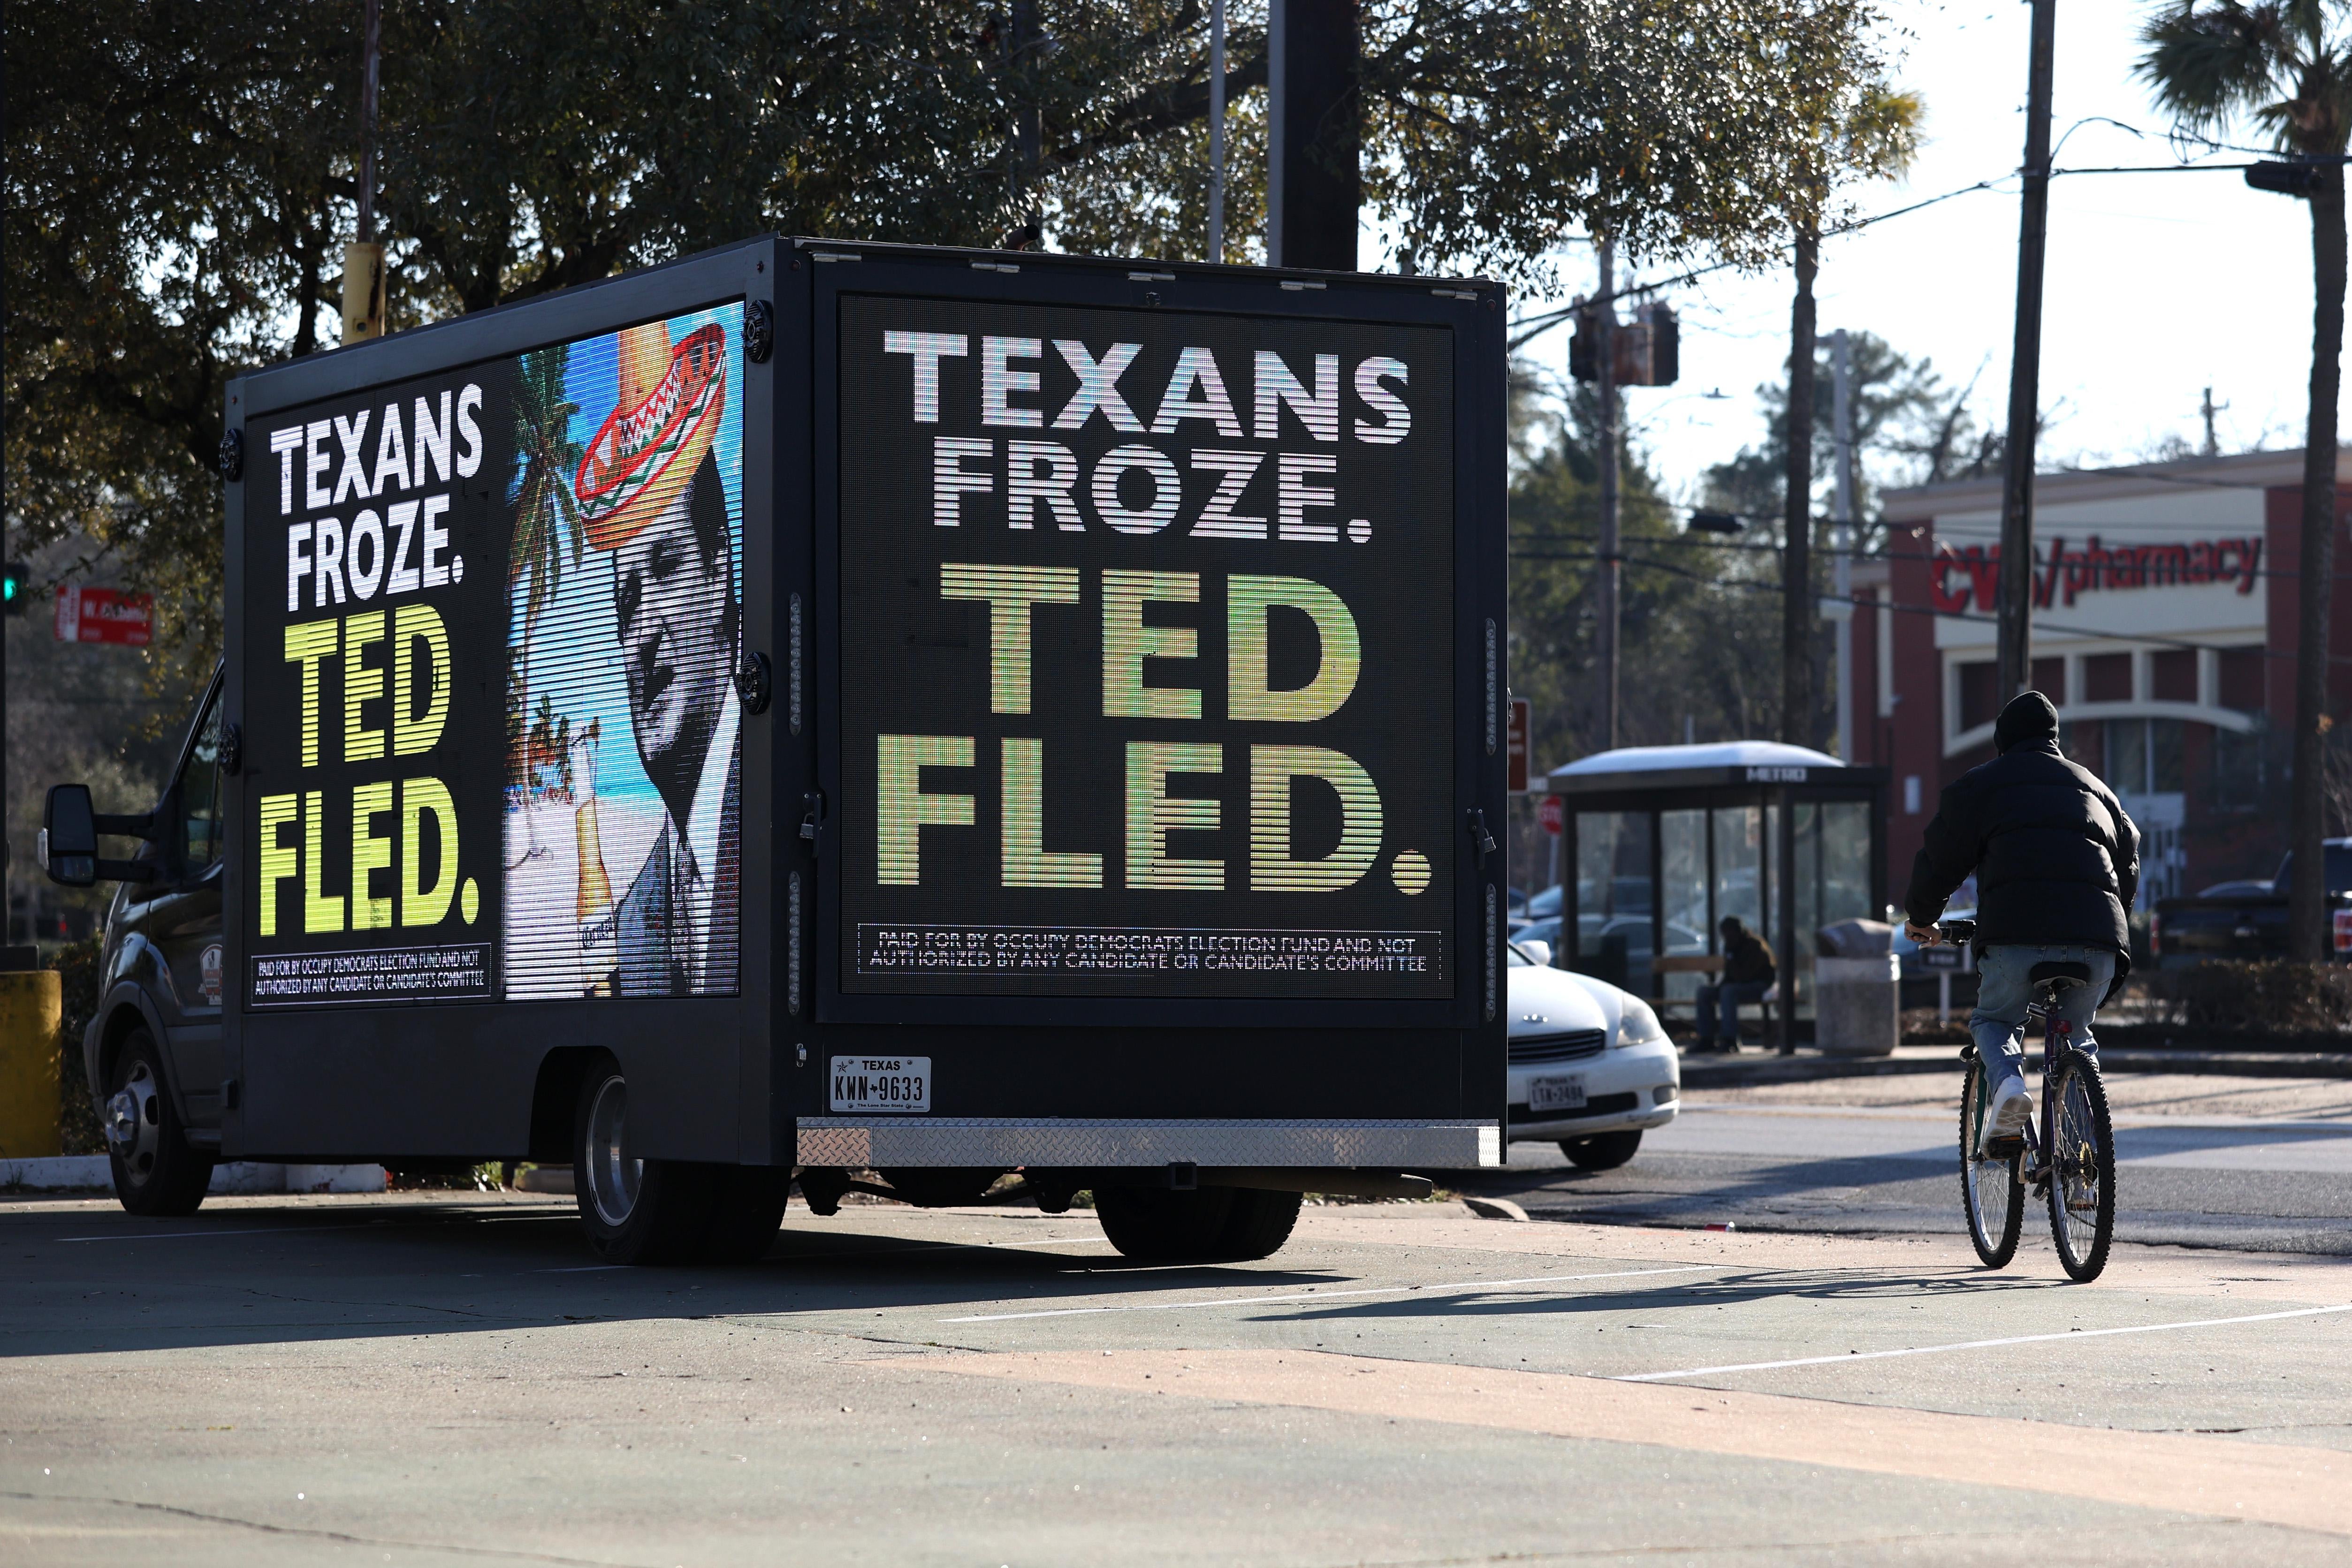 A digital billboard truck features a picture of Ted Cruz in a souvenir sombrero and the text, "TEXAS FROZE. TED FLED."